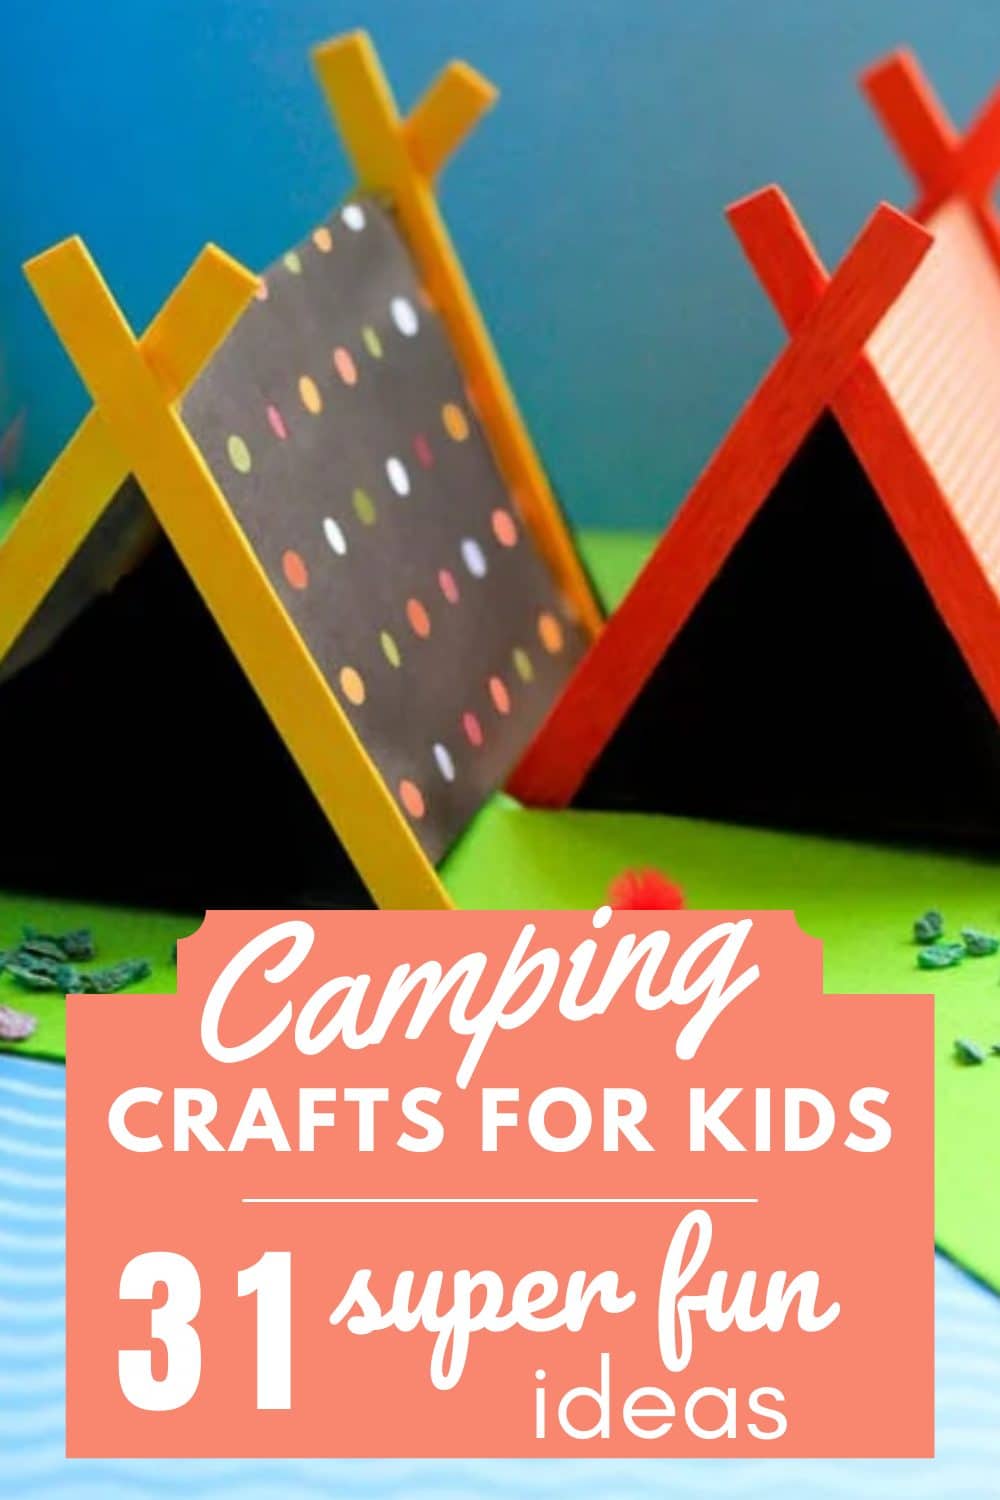 31 Crafts for Toddlers The Little Ones Will Love